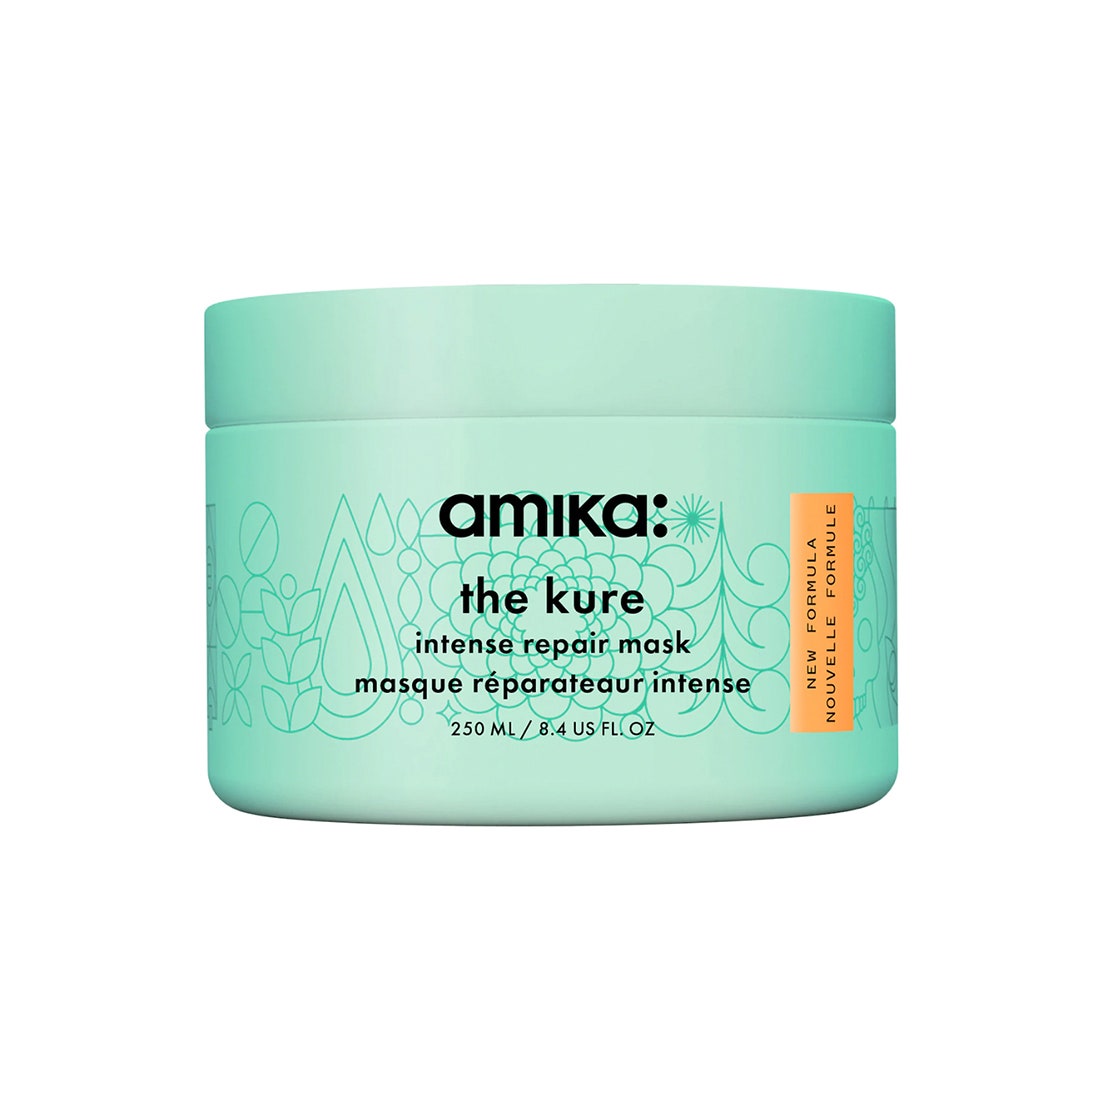 <p><strong>Why It's Worth It:</strong> Dry, damaged hair should grab a jar of Amika's The Kure Intense Bond Repair Mask, stat. This rich formula is part of the brand's line of <a href="https://www.allure.com/gallery/best-bond-repair-treatments-for-hair?mbid=synd_msn_rss&utm_source=msn&utm_medium=syndication">bond-repairing products</a> that's spiked with proprietary bond-cure technology. This ingredient is powered by plant-derived <a href="https://www.allure.com/gallery/best-protein-treatments-for-natural-hair?mbid=synd_msn_rss&utm_source=msn&utm_medium=syndication">proteins</a> to supply amino acids, which help rebuild bonds for stronger, shinier hair. Not to mention, it's also infused with antioxidant-rich sea buckthorn oil and moisturizing shea butter, mango butter, and borage oil.</p> <p><strong>Editor Tip:</strong> Sure, this hair mask is rich in oils, but finer hair types can still enjoy its custardy concoction. Its formula is totally weightless once rinsed off, so thinner hair can enjoy without any post-wash weightiness.</p> <p><strong>Key Ingredients:</strong> Plant-derived proteins, she butter, sea buckthorn oil, mango butter, borage oil | <strong>Who It's For:</strong> Anyone in need of an intensive in-shower frizz fighter.</p> $40, Amazon. <a href="https://www.amazon.com/amika-kure-intense-repair-100ml/dp/B09B8YQ6RF?">Get it now!</a><p>Get your daily dose of beauty tips, tricks, and product recommendations sent straight to your inbox.</p><a href="https://www.allure.com/newsletter/subscribe?sourceCode=msnsend">Sign Up Now</a>